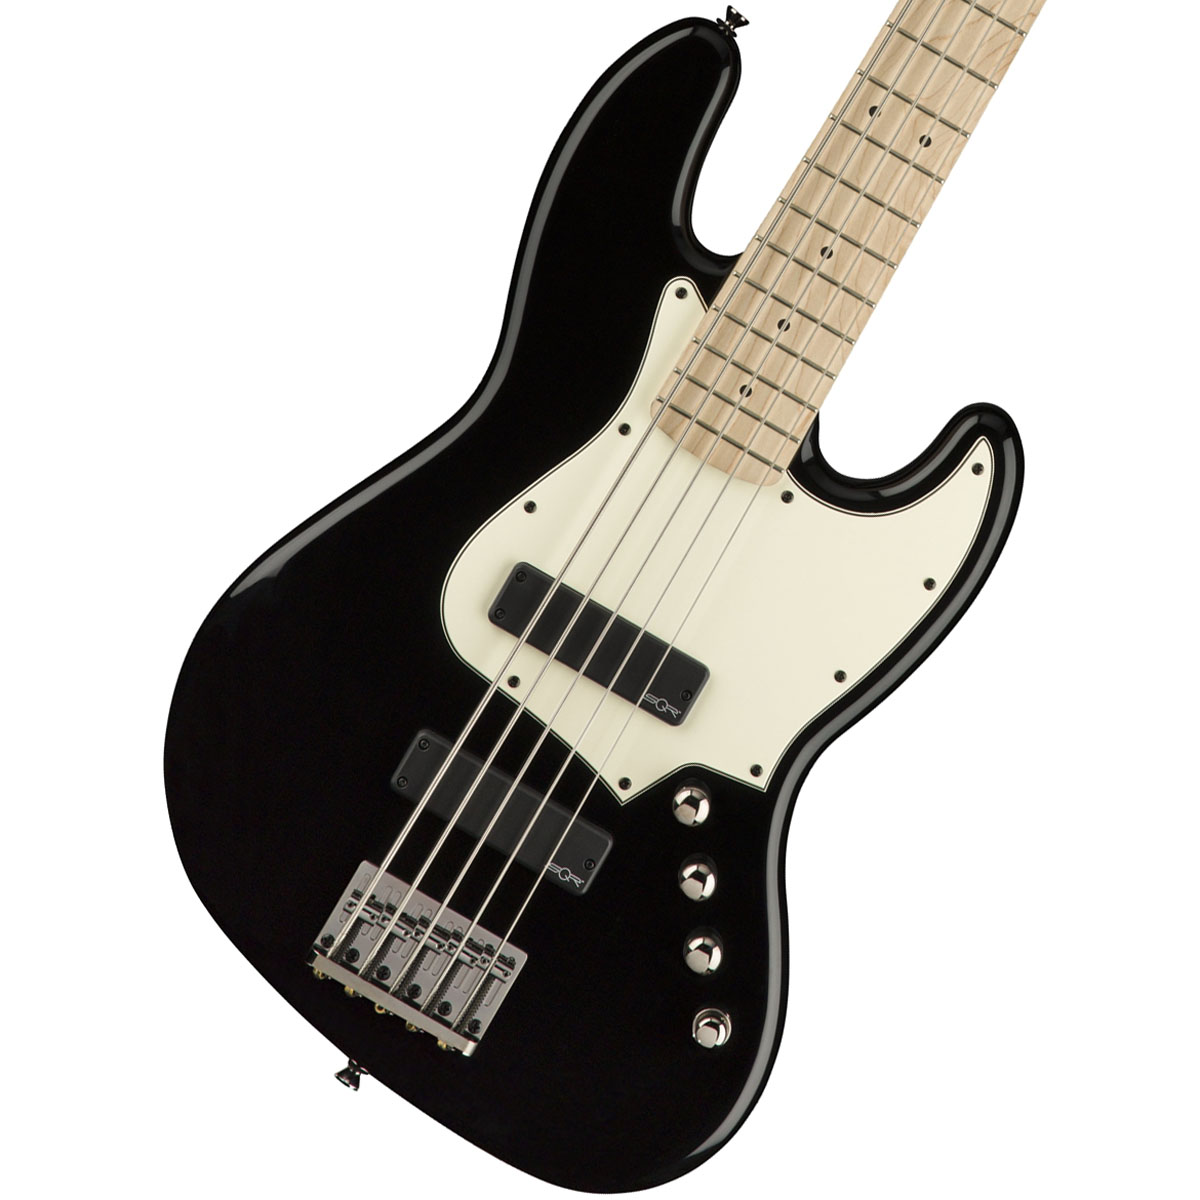 Squier by Fender / Contemporary Active Jazz Bass HH V Black 5弦 エレキベース